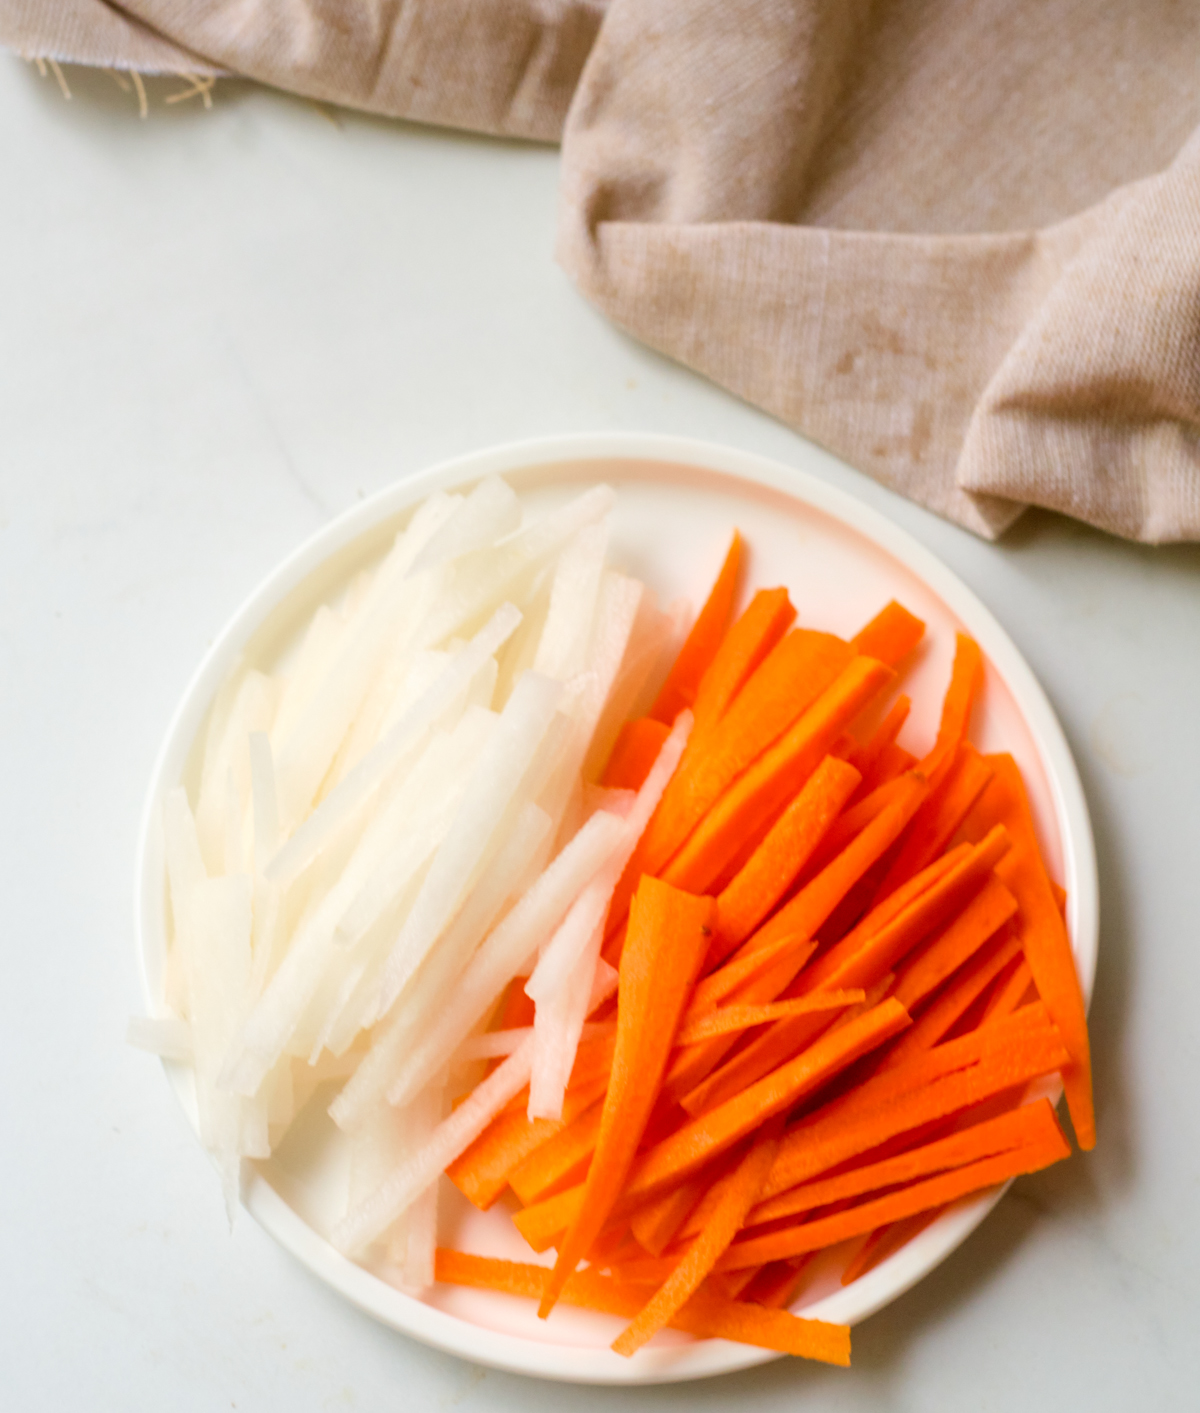 julienned carrots and daikon